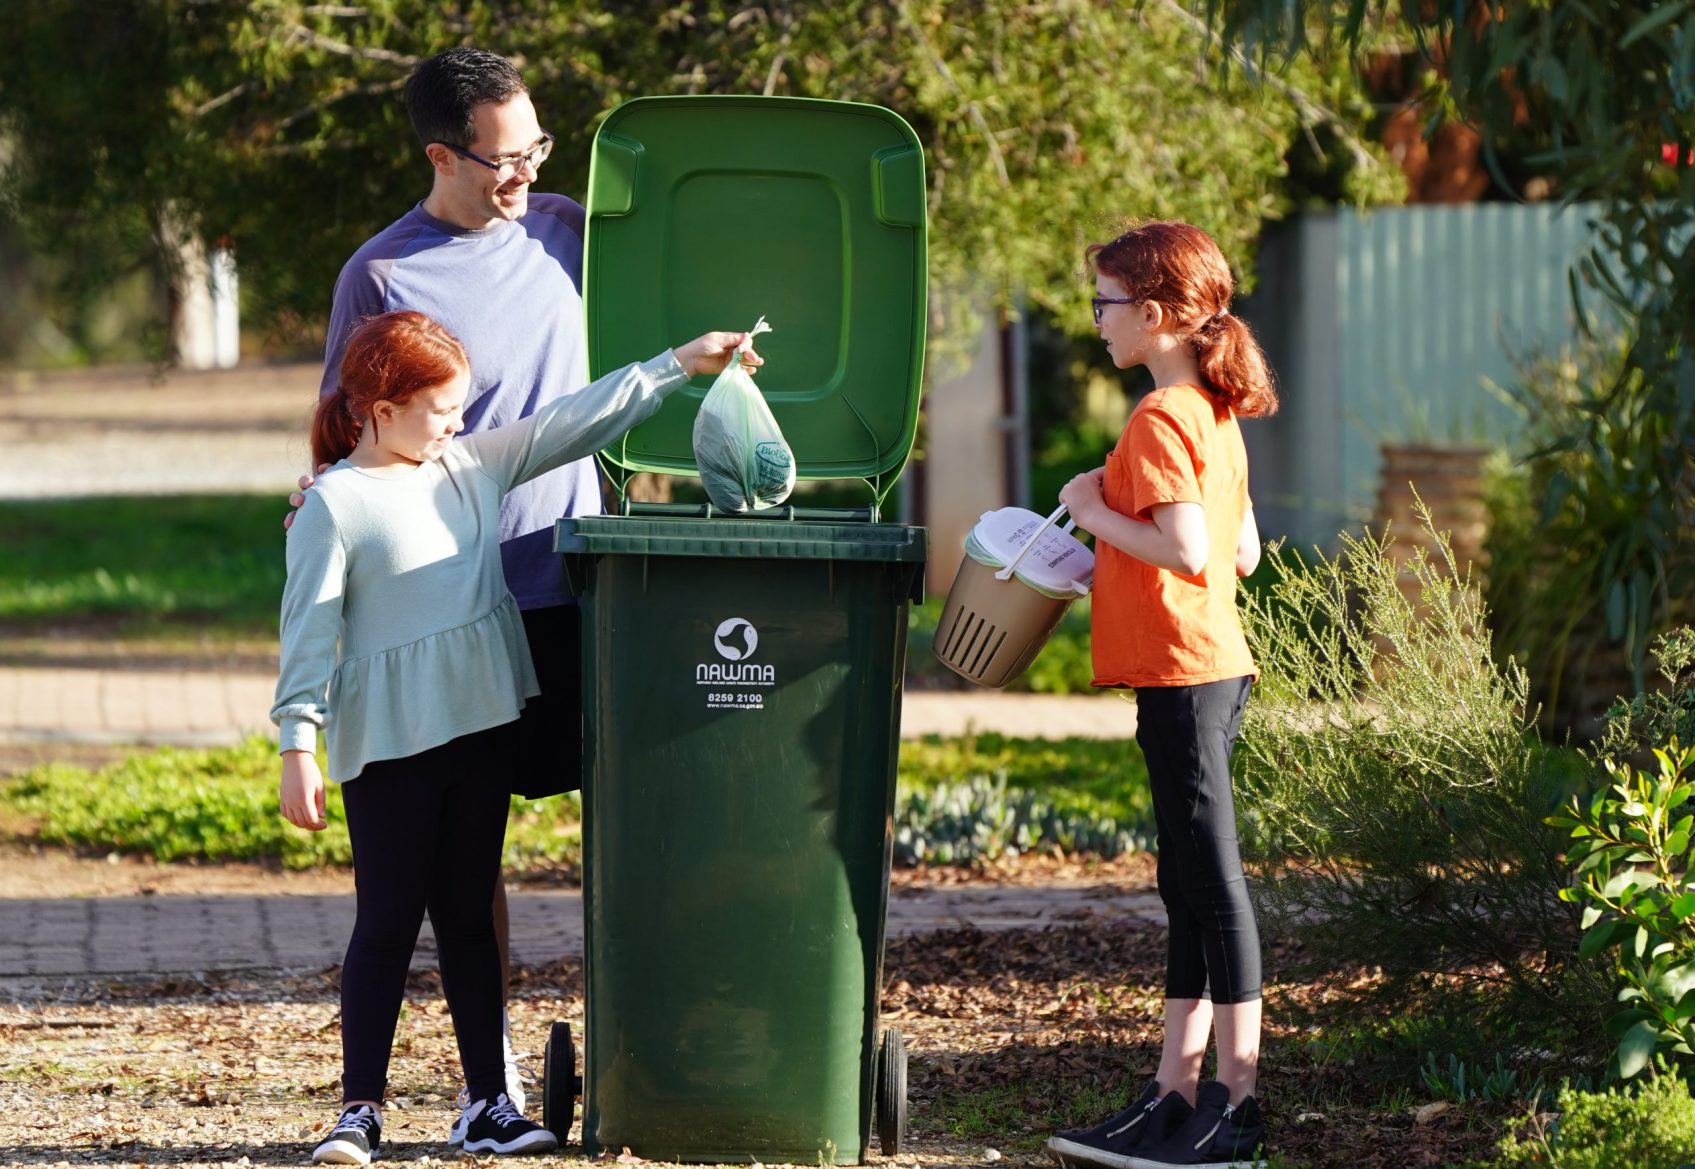 Father standing near kerbside FOGO bin with two children. The father is holding the lid to the bin open and one child is dropping a compostable bag with food scraps into the bin. The other child is holding a ventilated kitchen caddy lined with a compostable bag.